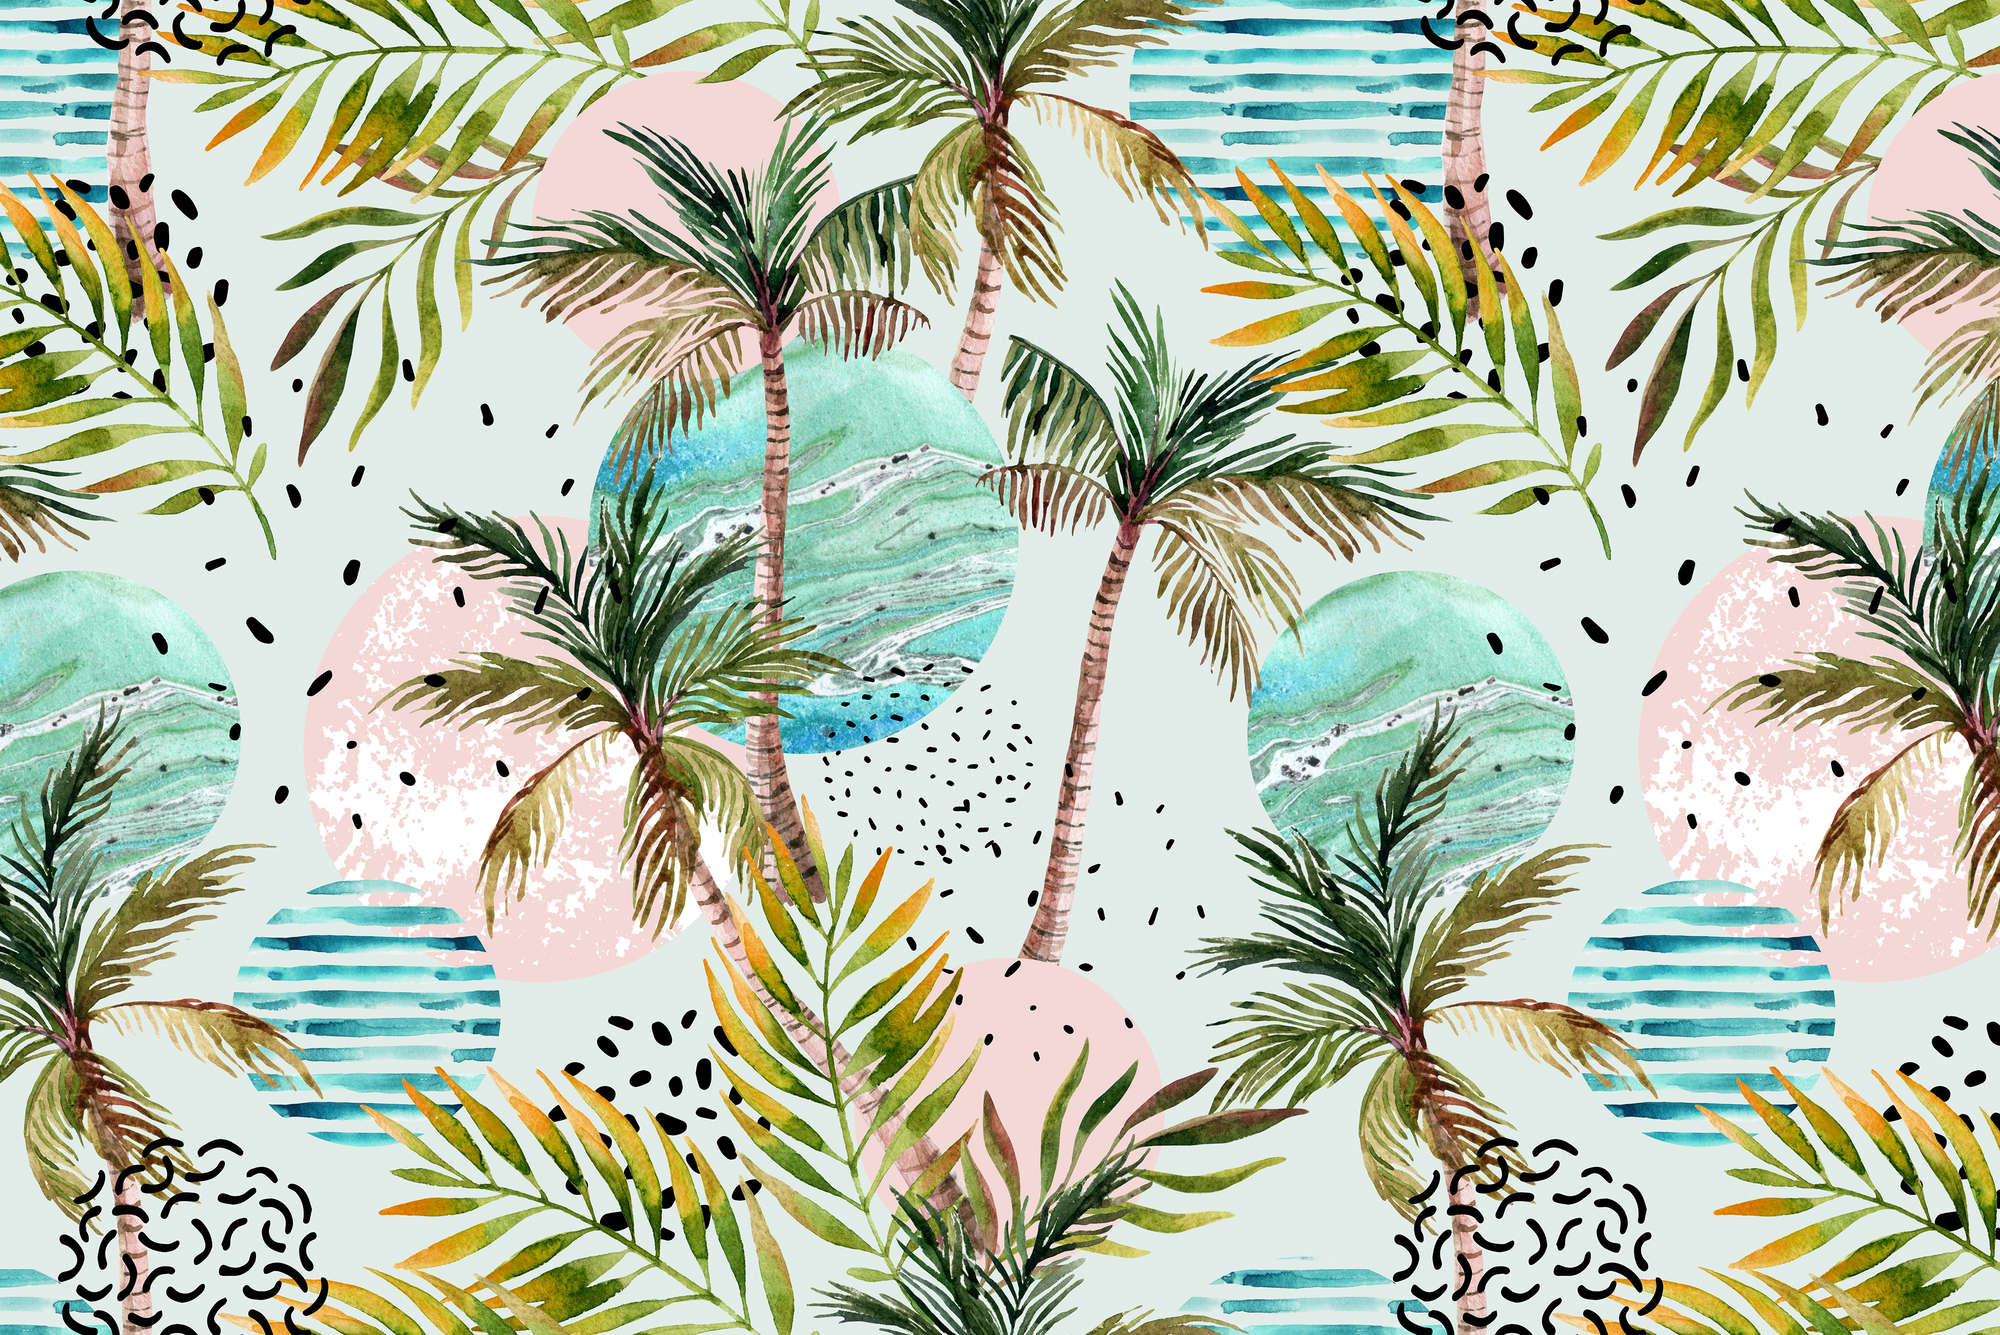             Graphic mural palm trees with wave symbols on matt smooth non-woven
        